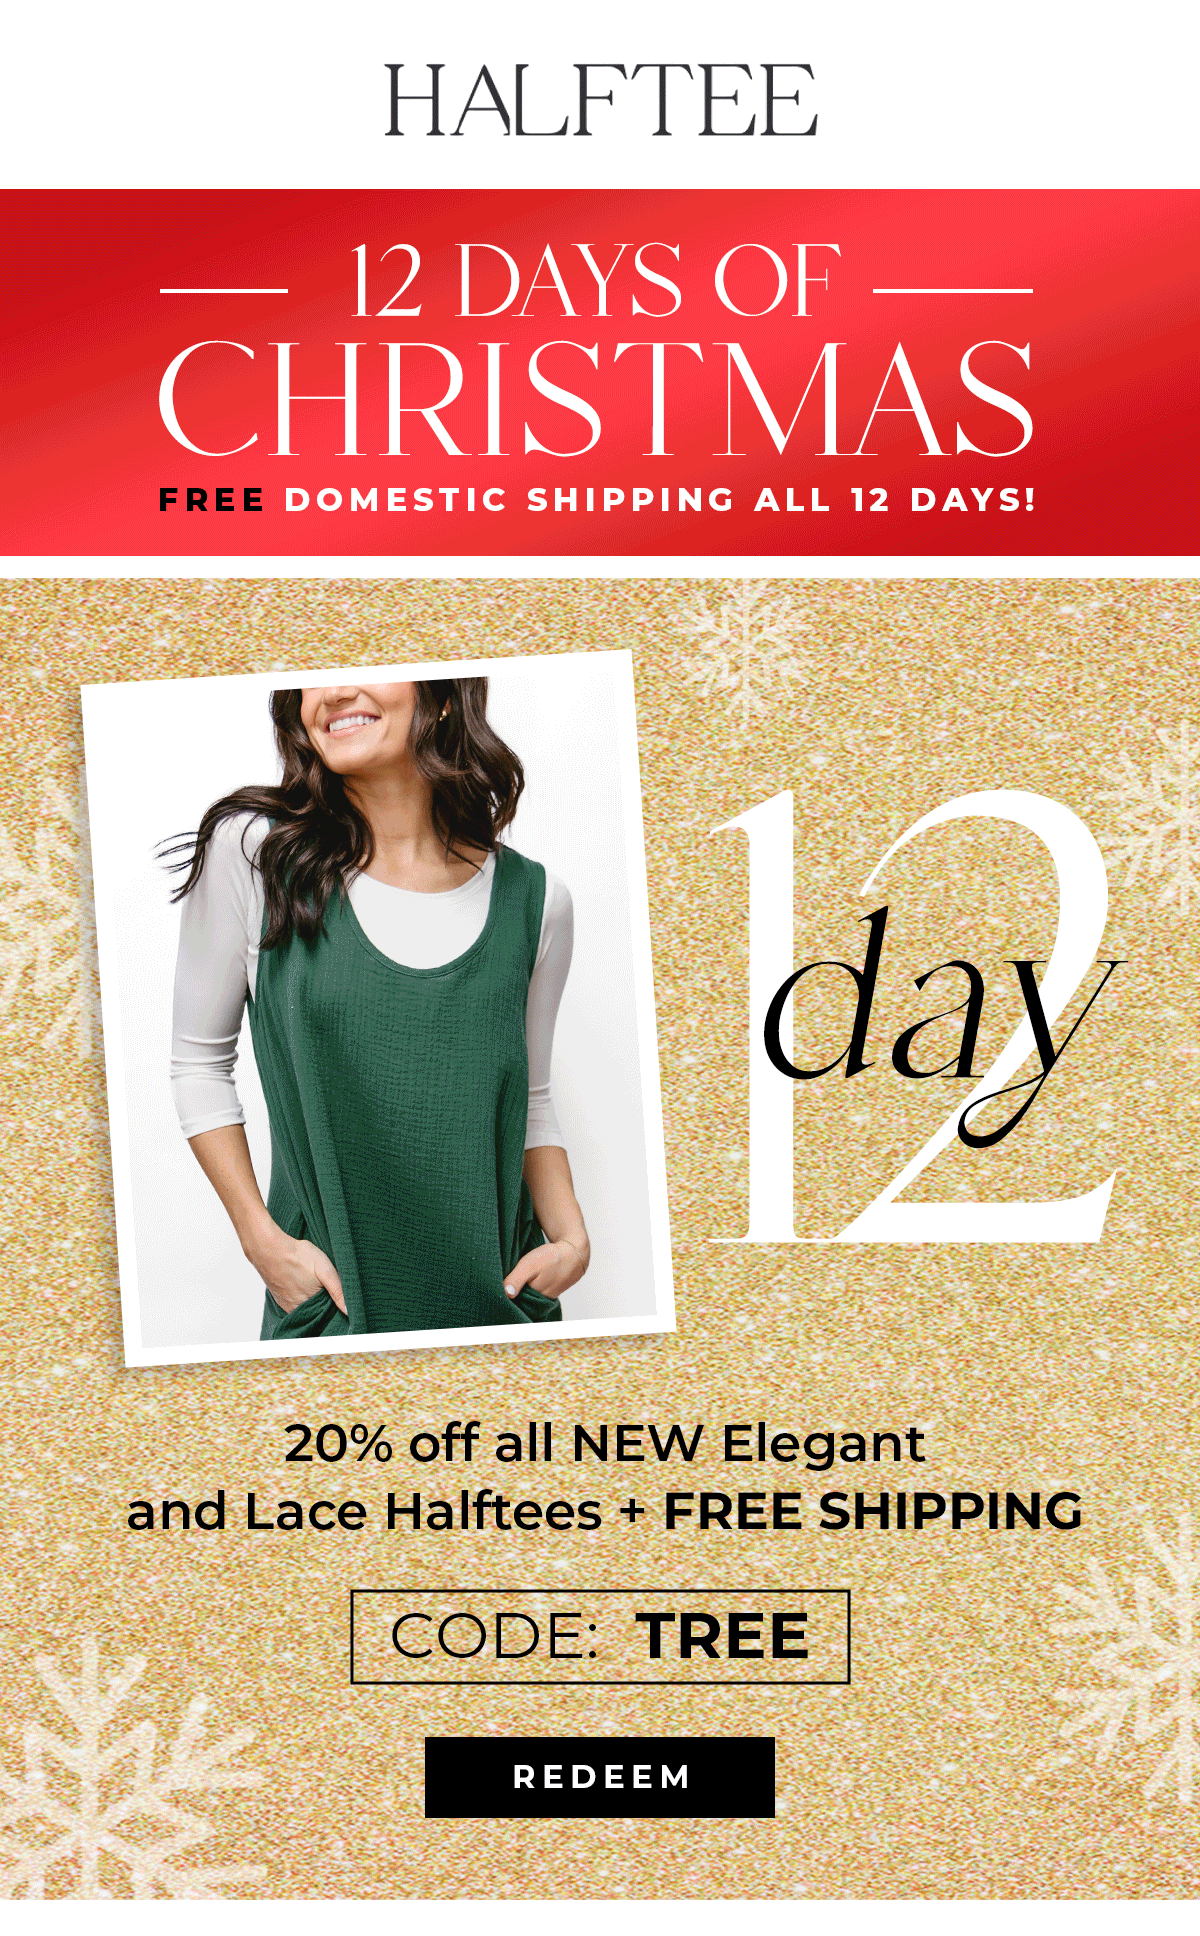 LAST DAY TO SAVE! 12 Days of Christmas Day 12 20% off all NEW Elegant and Lace Halftees + Free Shipping Use code: TREE